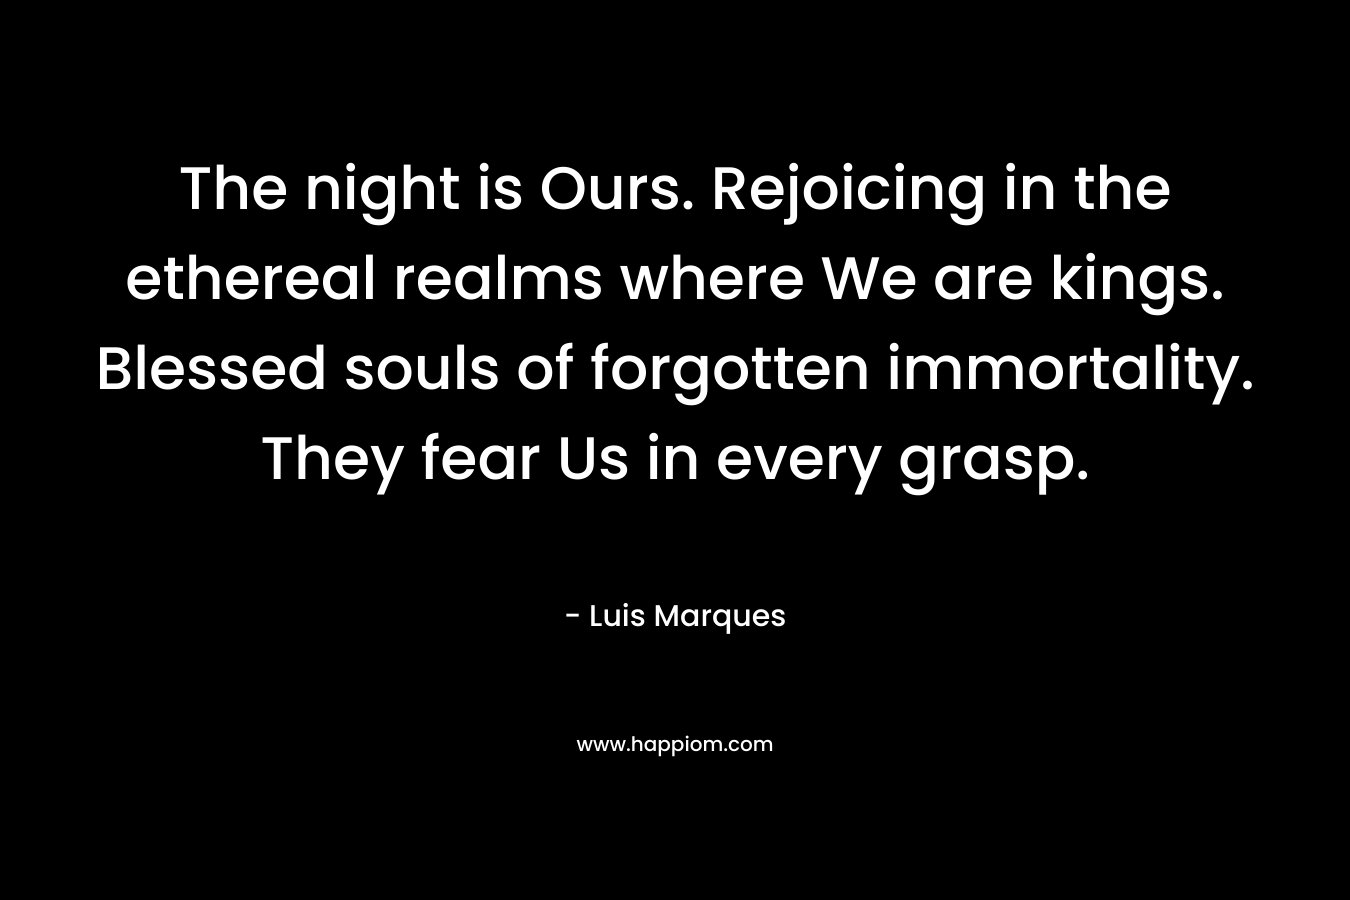 The night is Ours. Rejoicing in the ethereal realms where We are kings. Blessed souls of forgotten immortality. They fear Us in every grasp. – Luis Marques